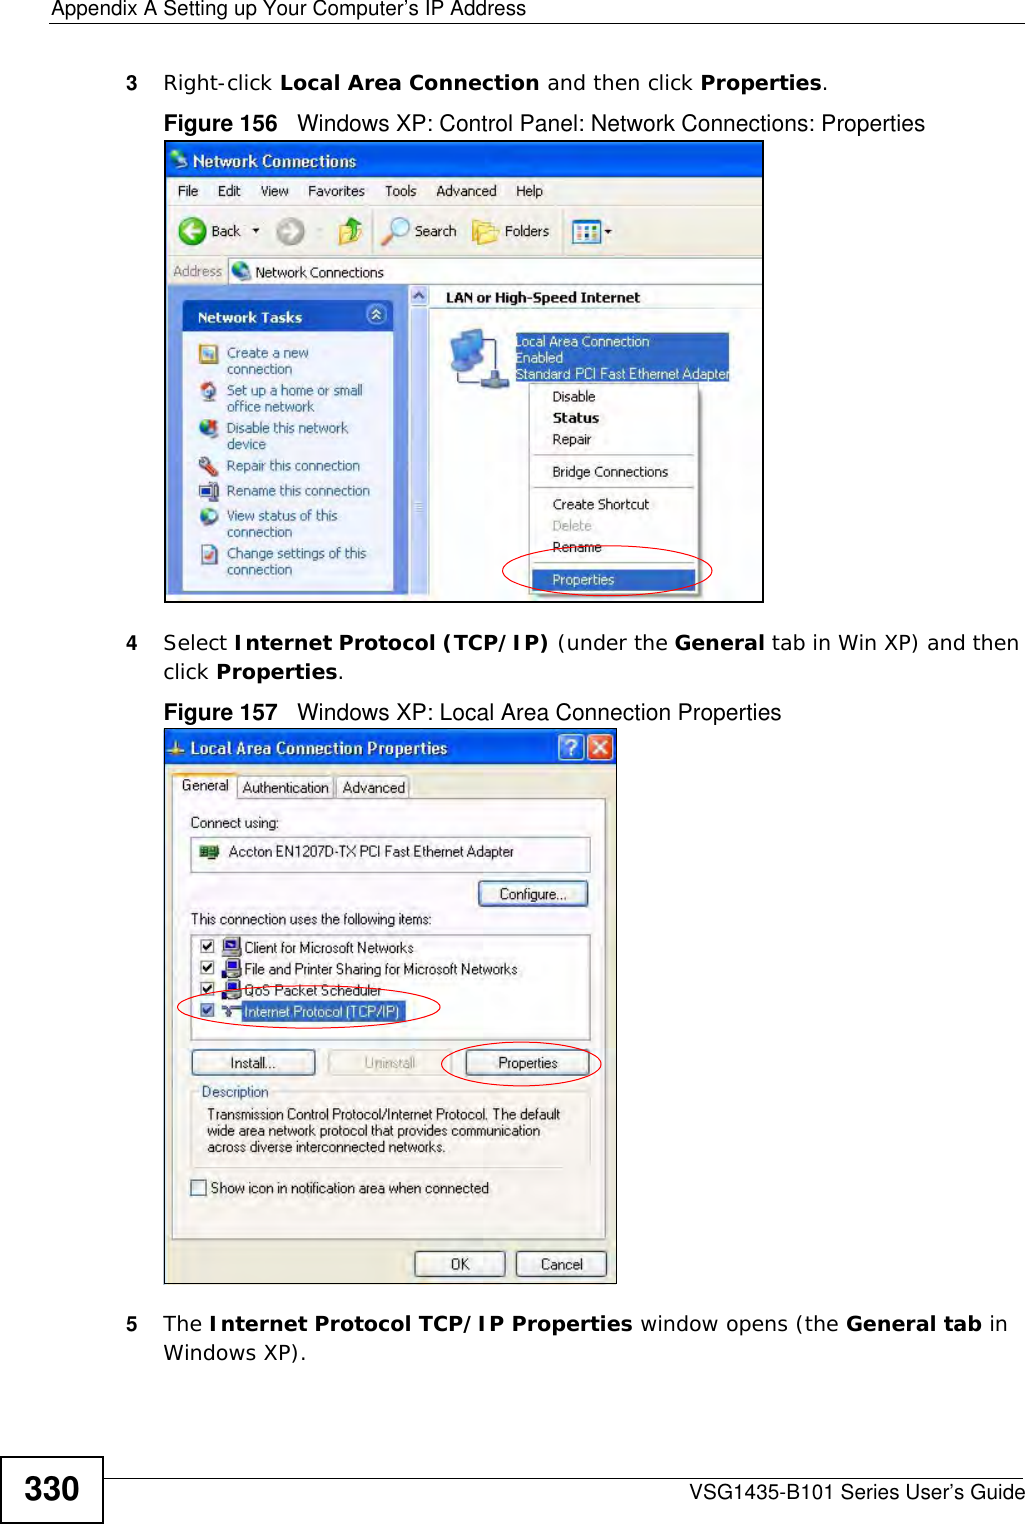 Appendix A Setting up Your Computer’s IP AddressVSG1435-B101 Series User’s Guide3303Right-click Local Area Connection and then click Properties.Figure 156   Windows XP: Control Panel: Network Connections: Properties4Select Internet Protocol (TCP/IP) (under the General tab in Win XP) and then click Properties.Figure 157   Windows XP: Local Area Connection Properties5The Internet Protocol TCP/IP Properties window opens (the General tab in Windows XP).